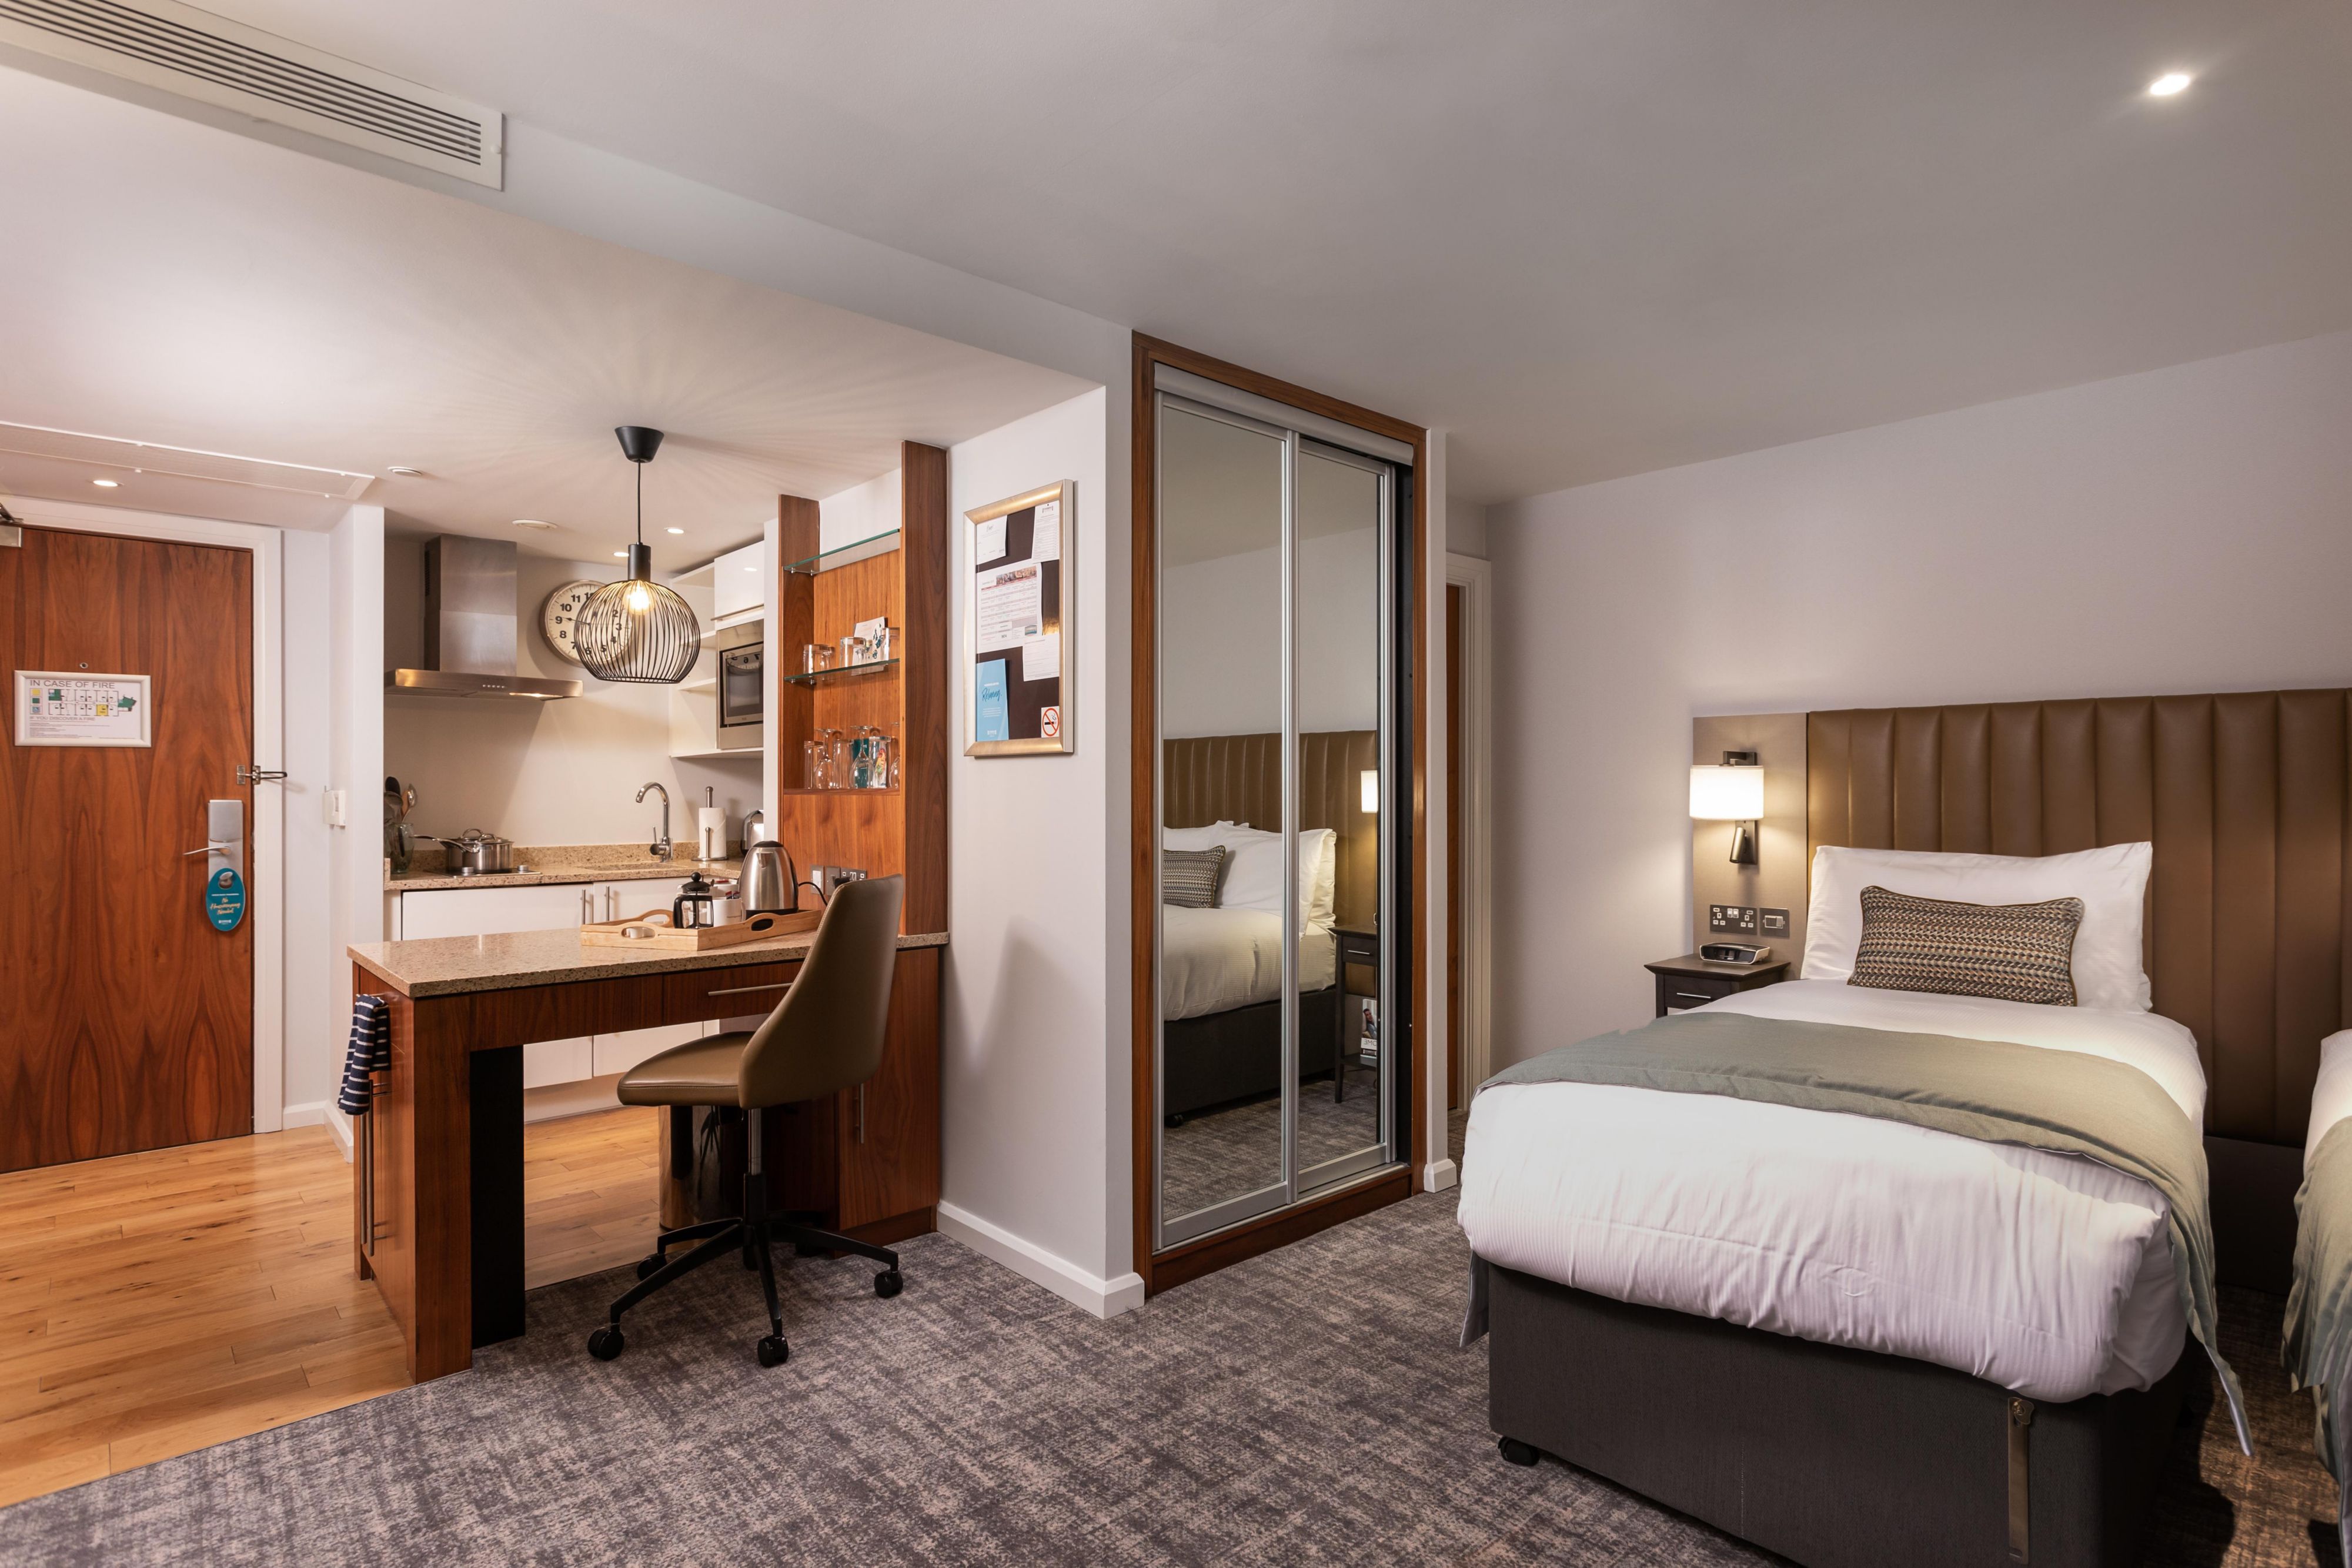 Each room is spacious and offers fully-equipped kitchens for guest convenience and comfort.